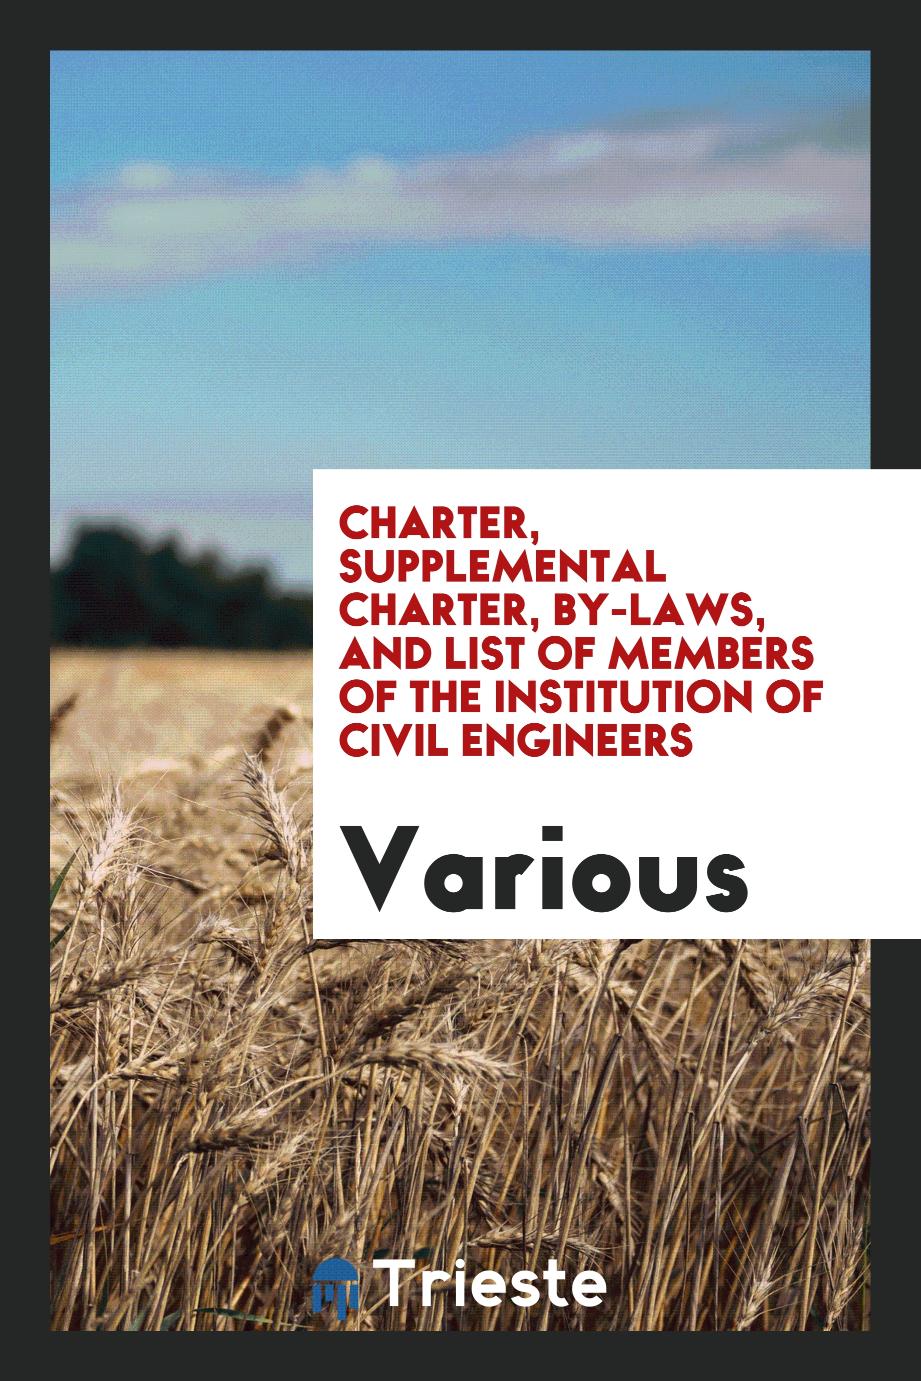 Charter, Supplemental Charter, By-Laws, and List of Members of the Institution of Civil Engineers